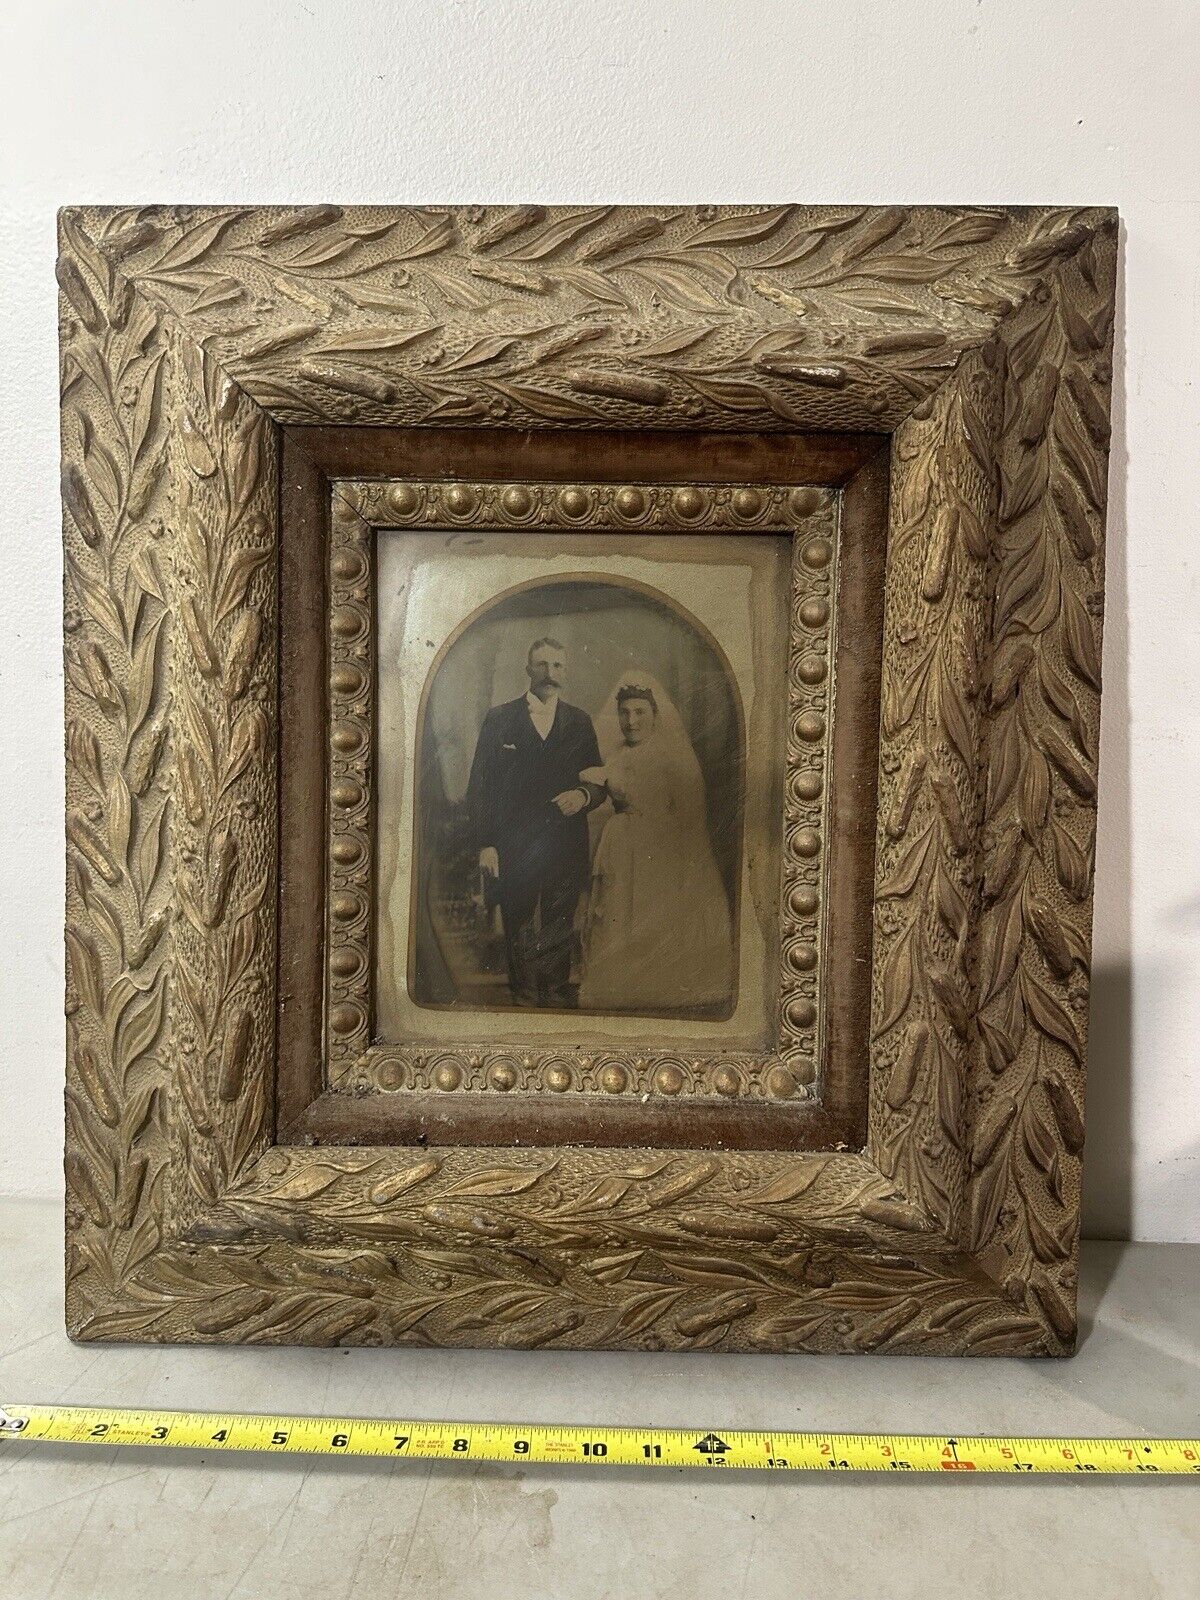 21x19” Antique Wooden Frame Carved Cattails & Full Plate Tintype Wedding Photo